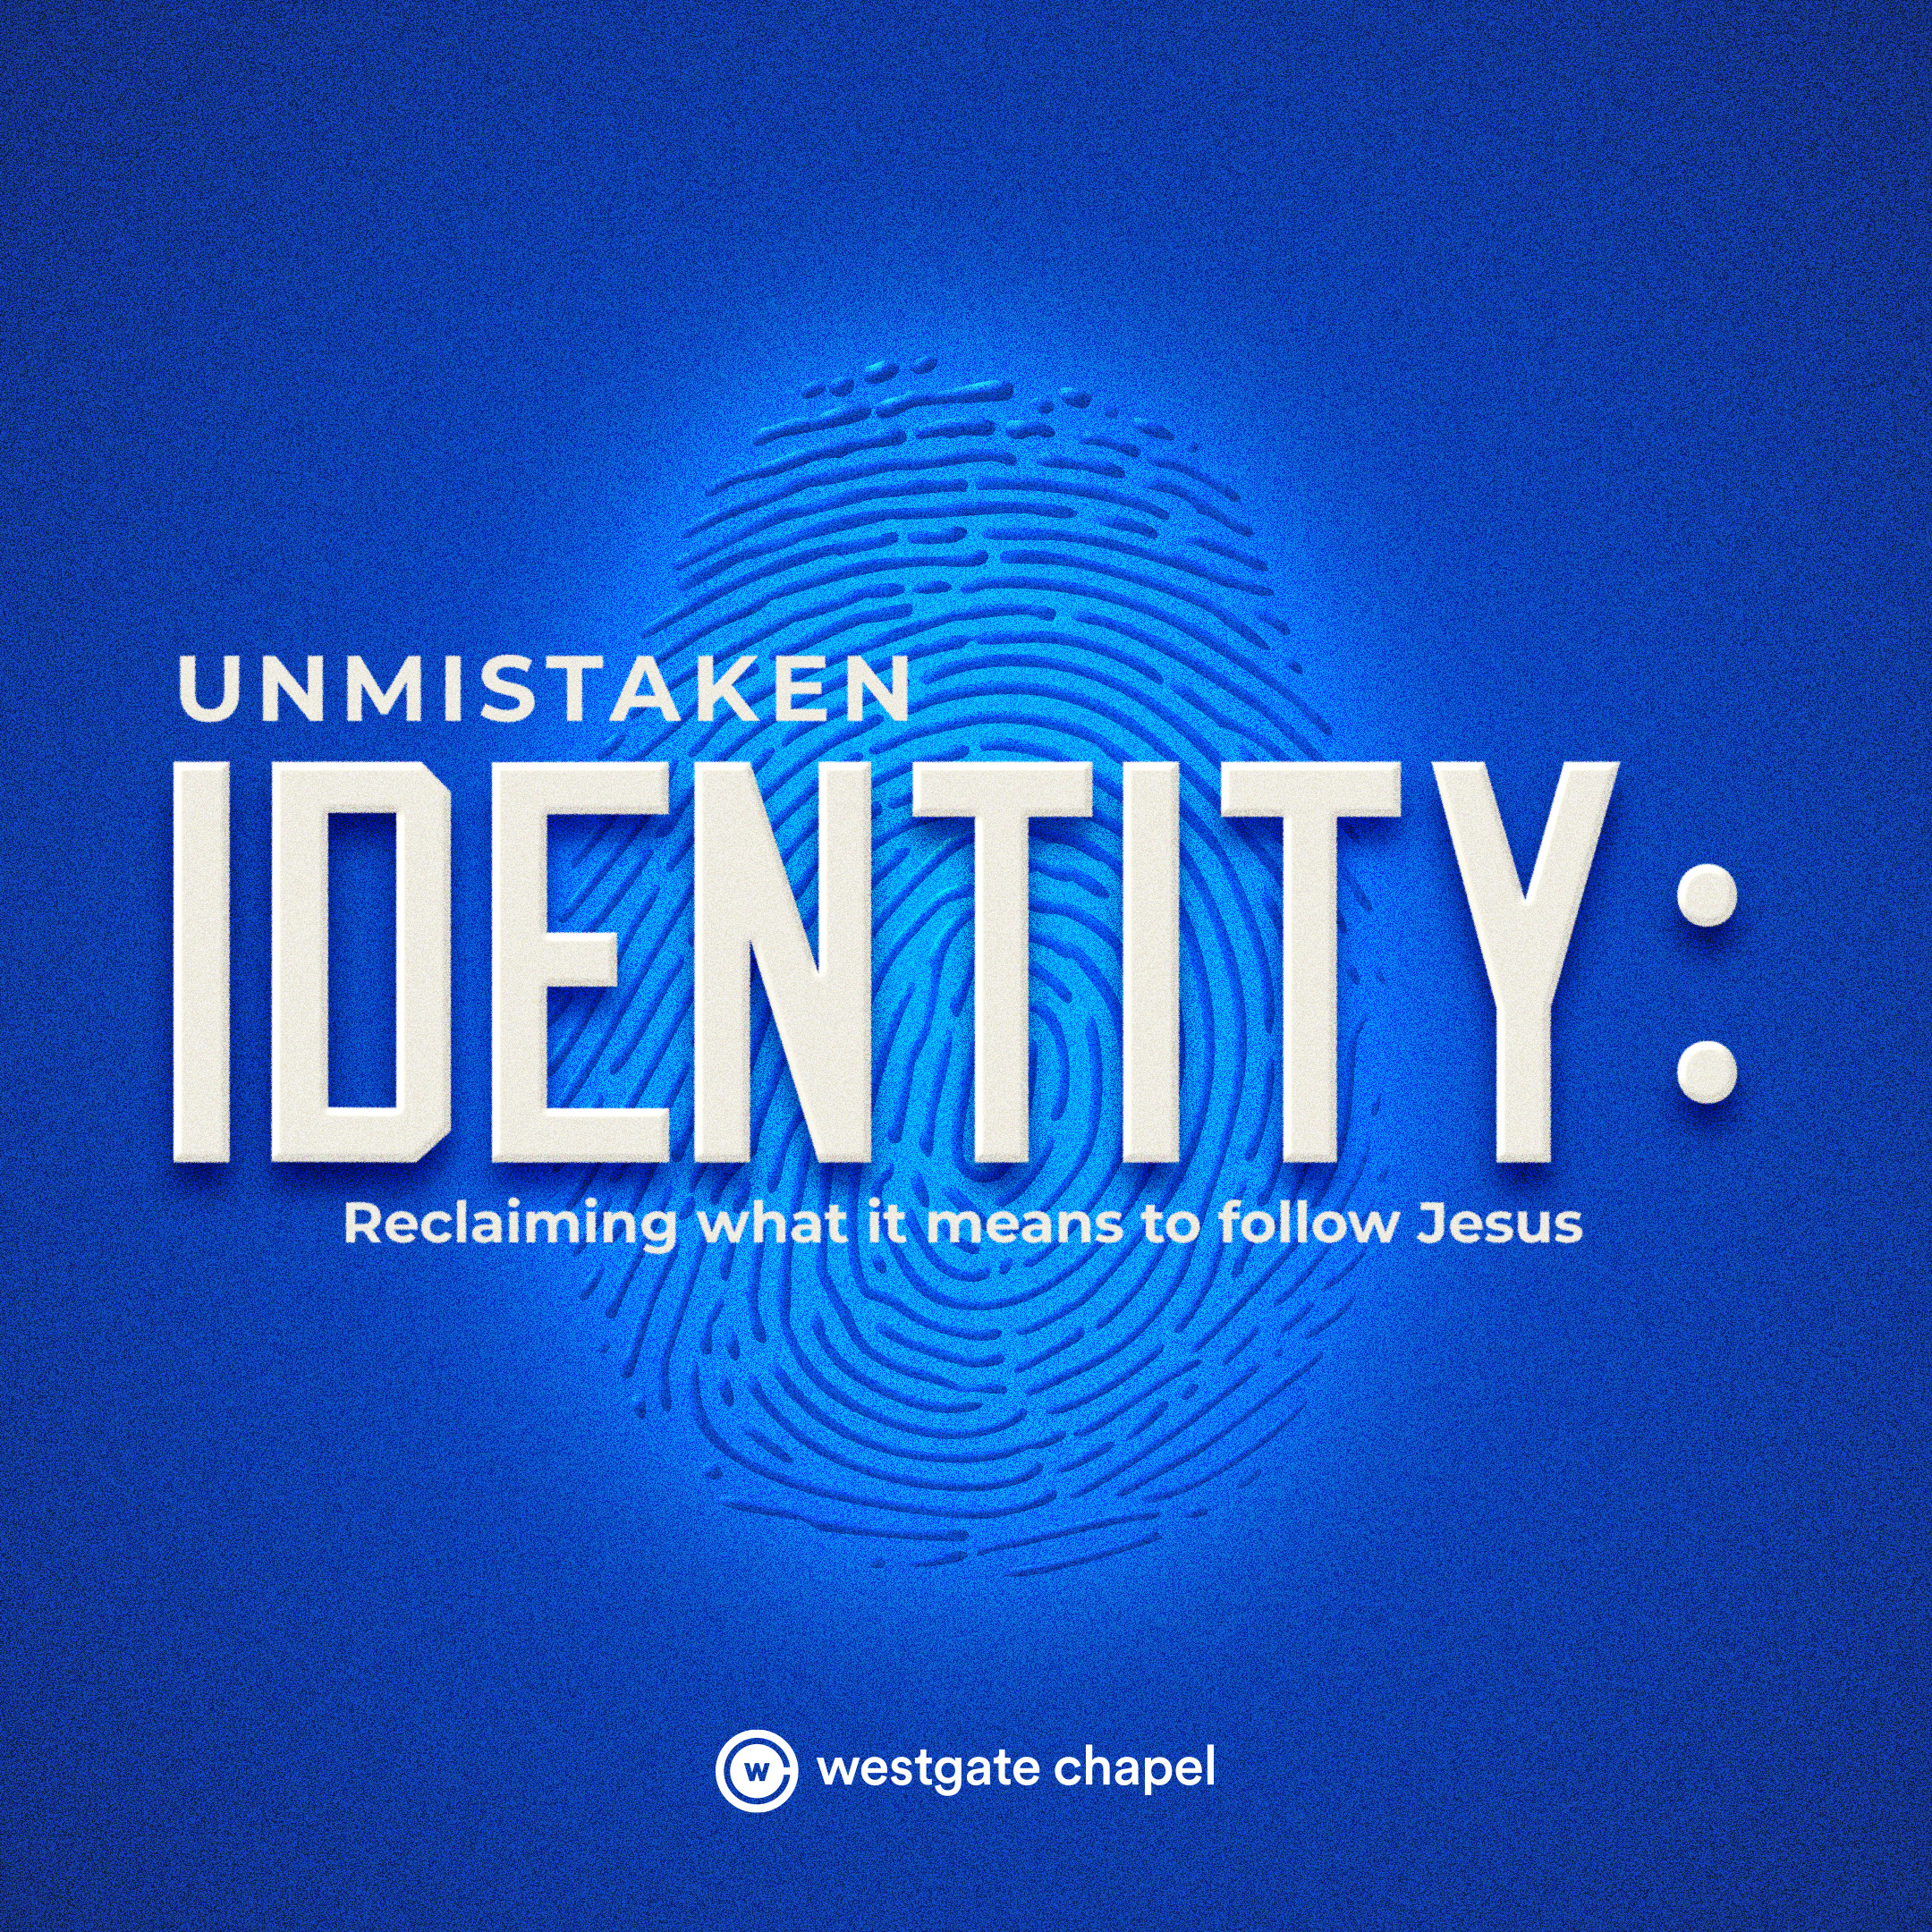 UnMistaken Identity: From FIRST to LAST